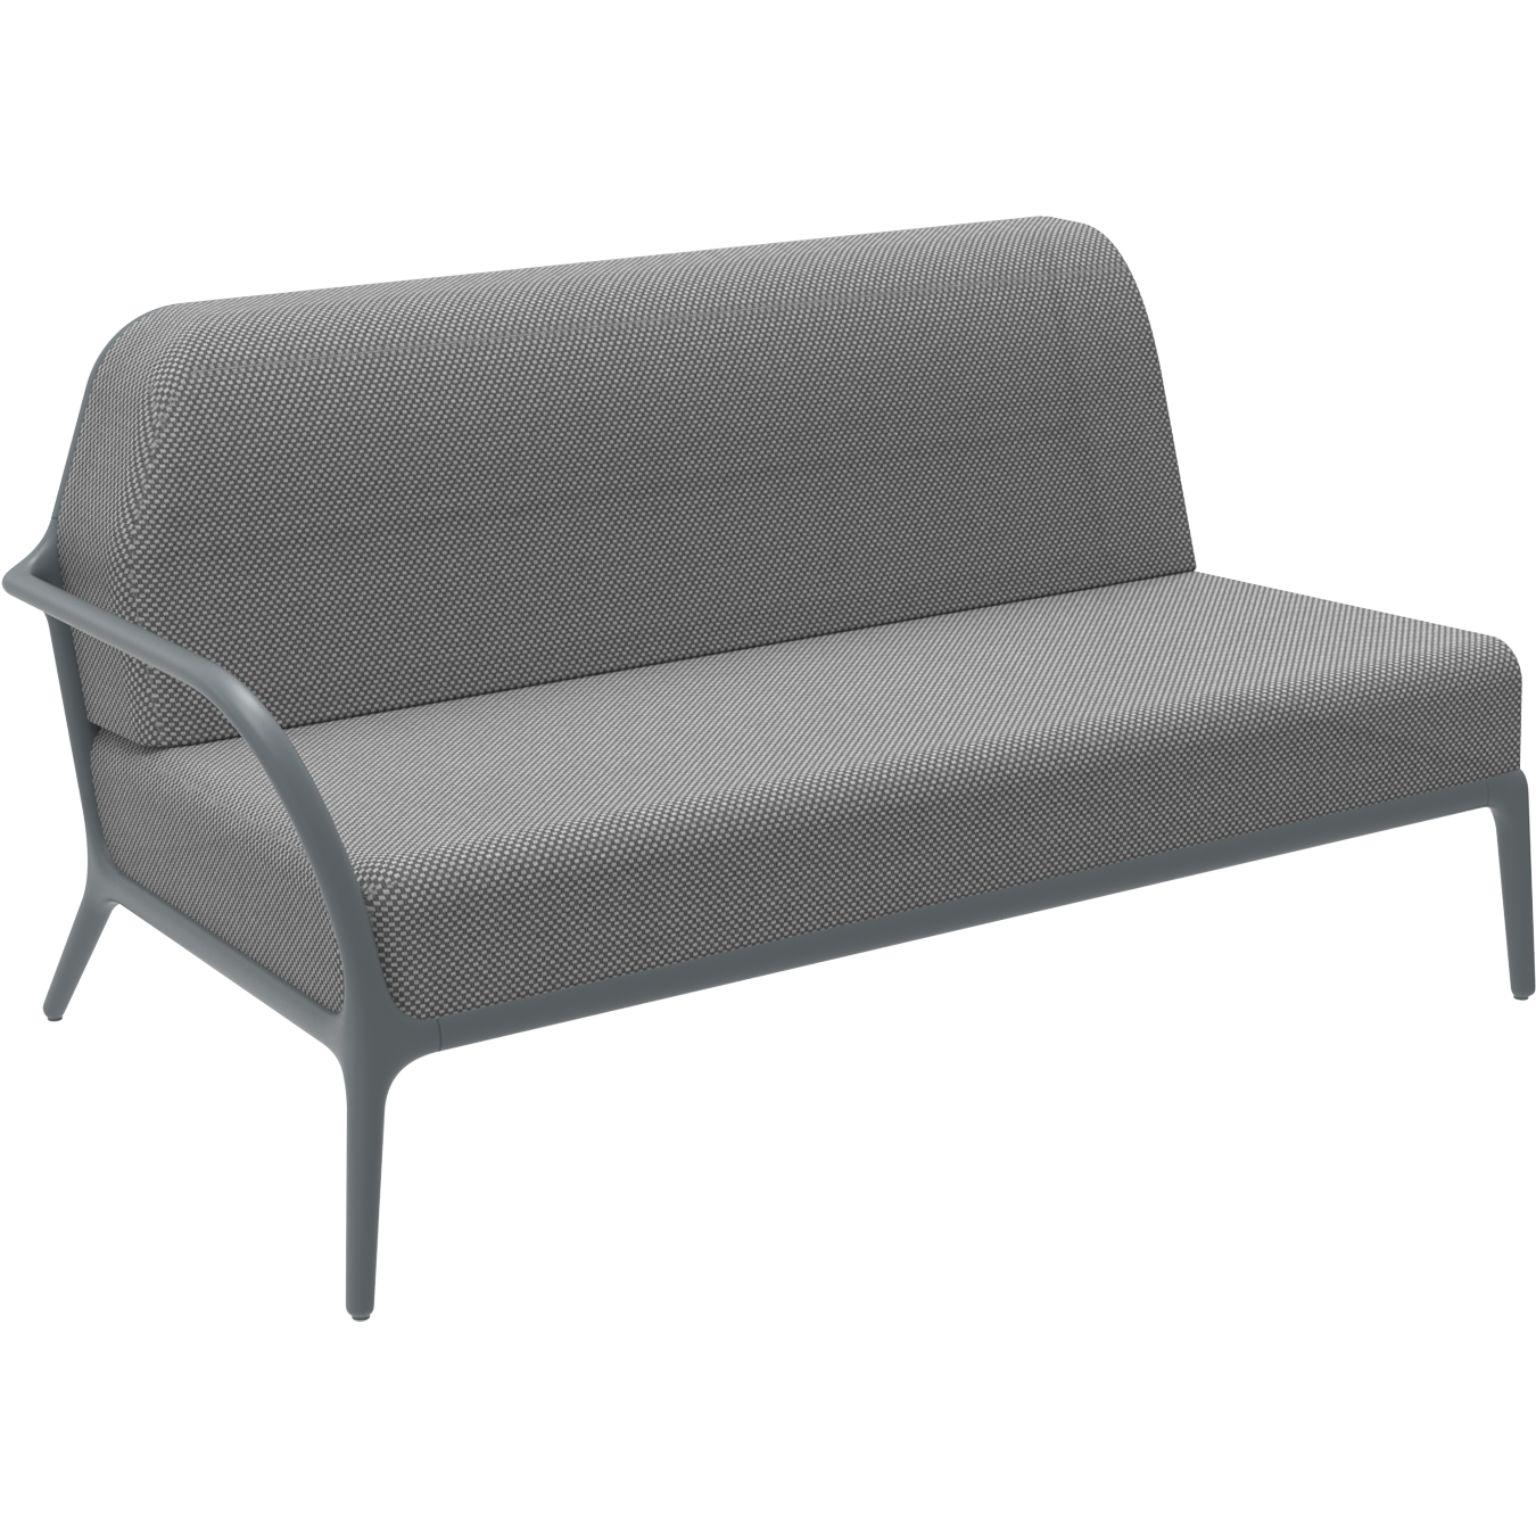 Xaloc Right 160 grey modular sofa by MOWEE
Dimensions: D100 x W160 x H81 cm (Seat Height 42 cm)
Material: Aluminum, Textile
Weight: 37 kg
Also Available in different colors and finishes.

 Xaloc synthesizes the lines of interior furniture to